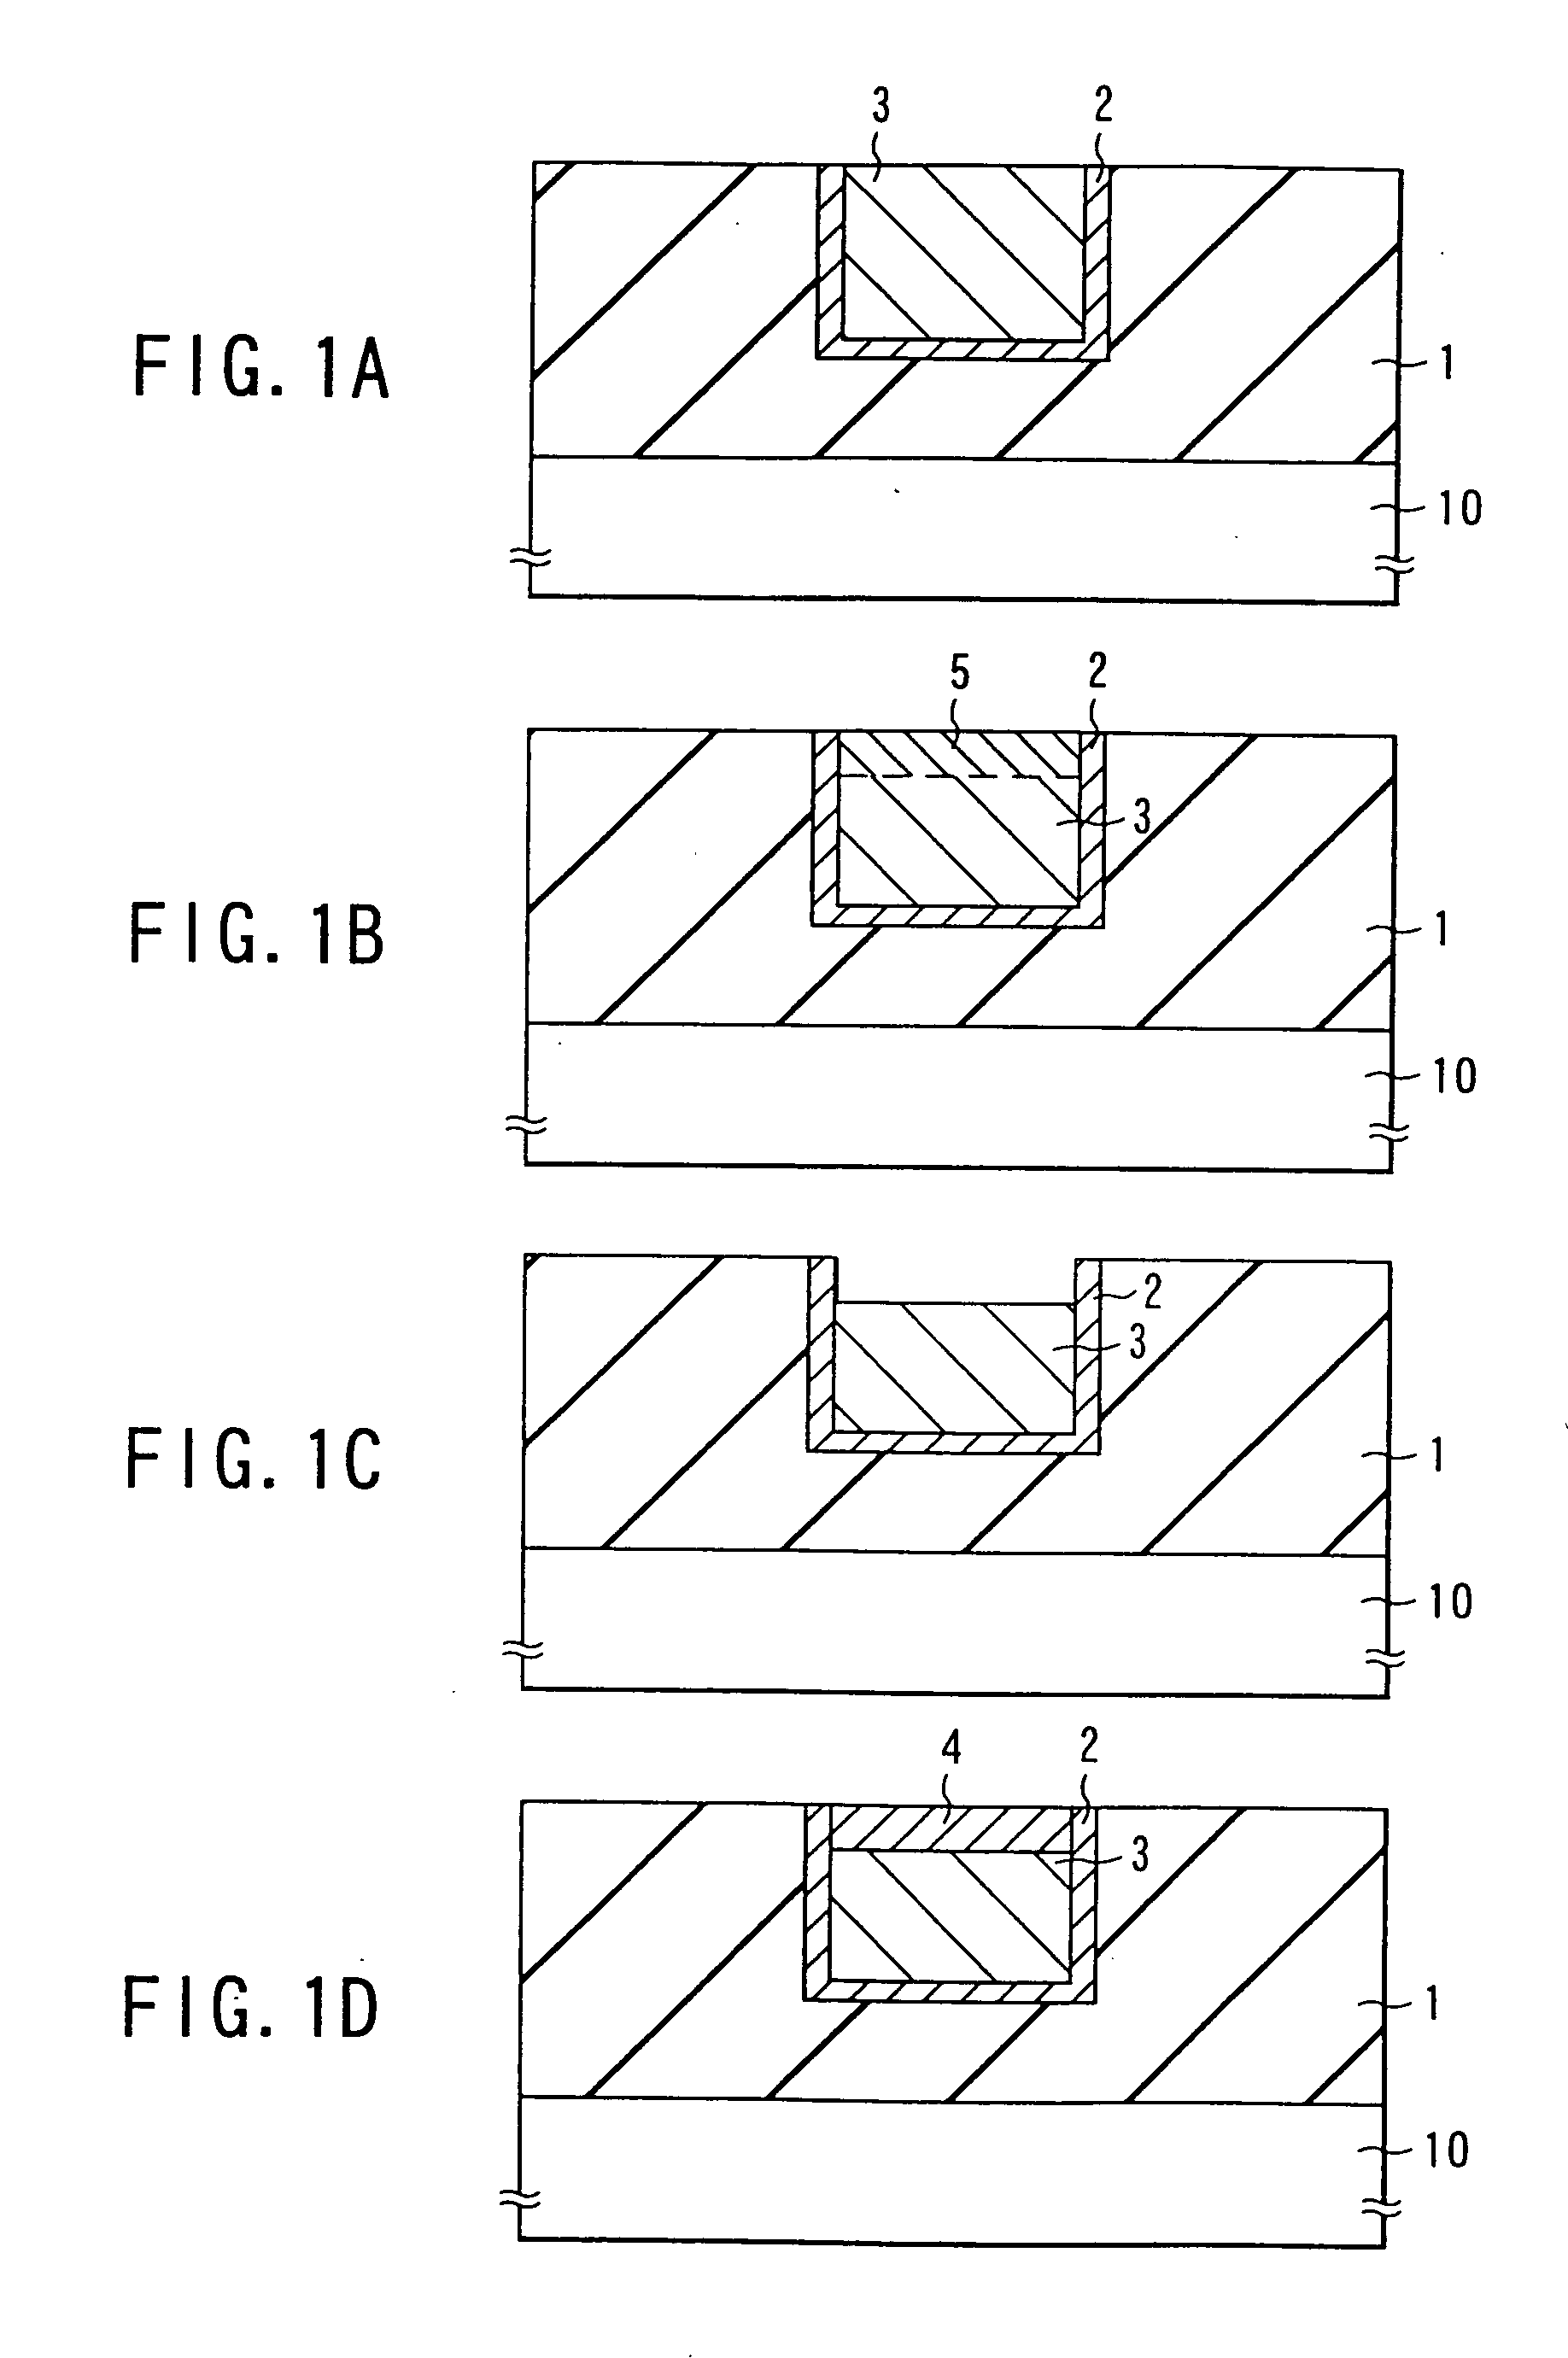 Method of plating a metal or metal or metal compound on a semiconductor substrate that includes using the same main component in both plating and etching solutions